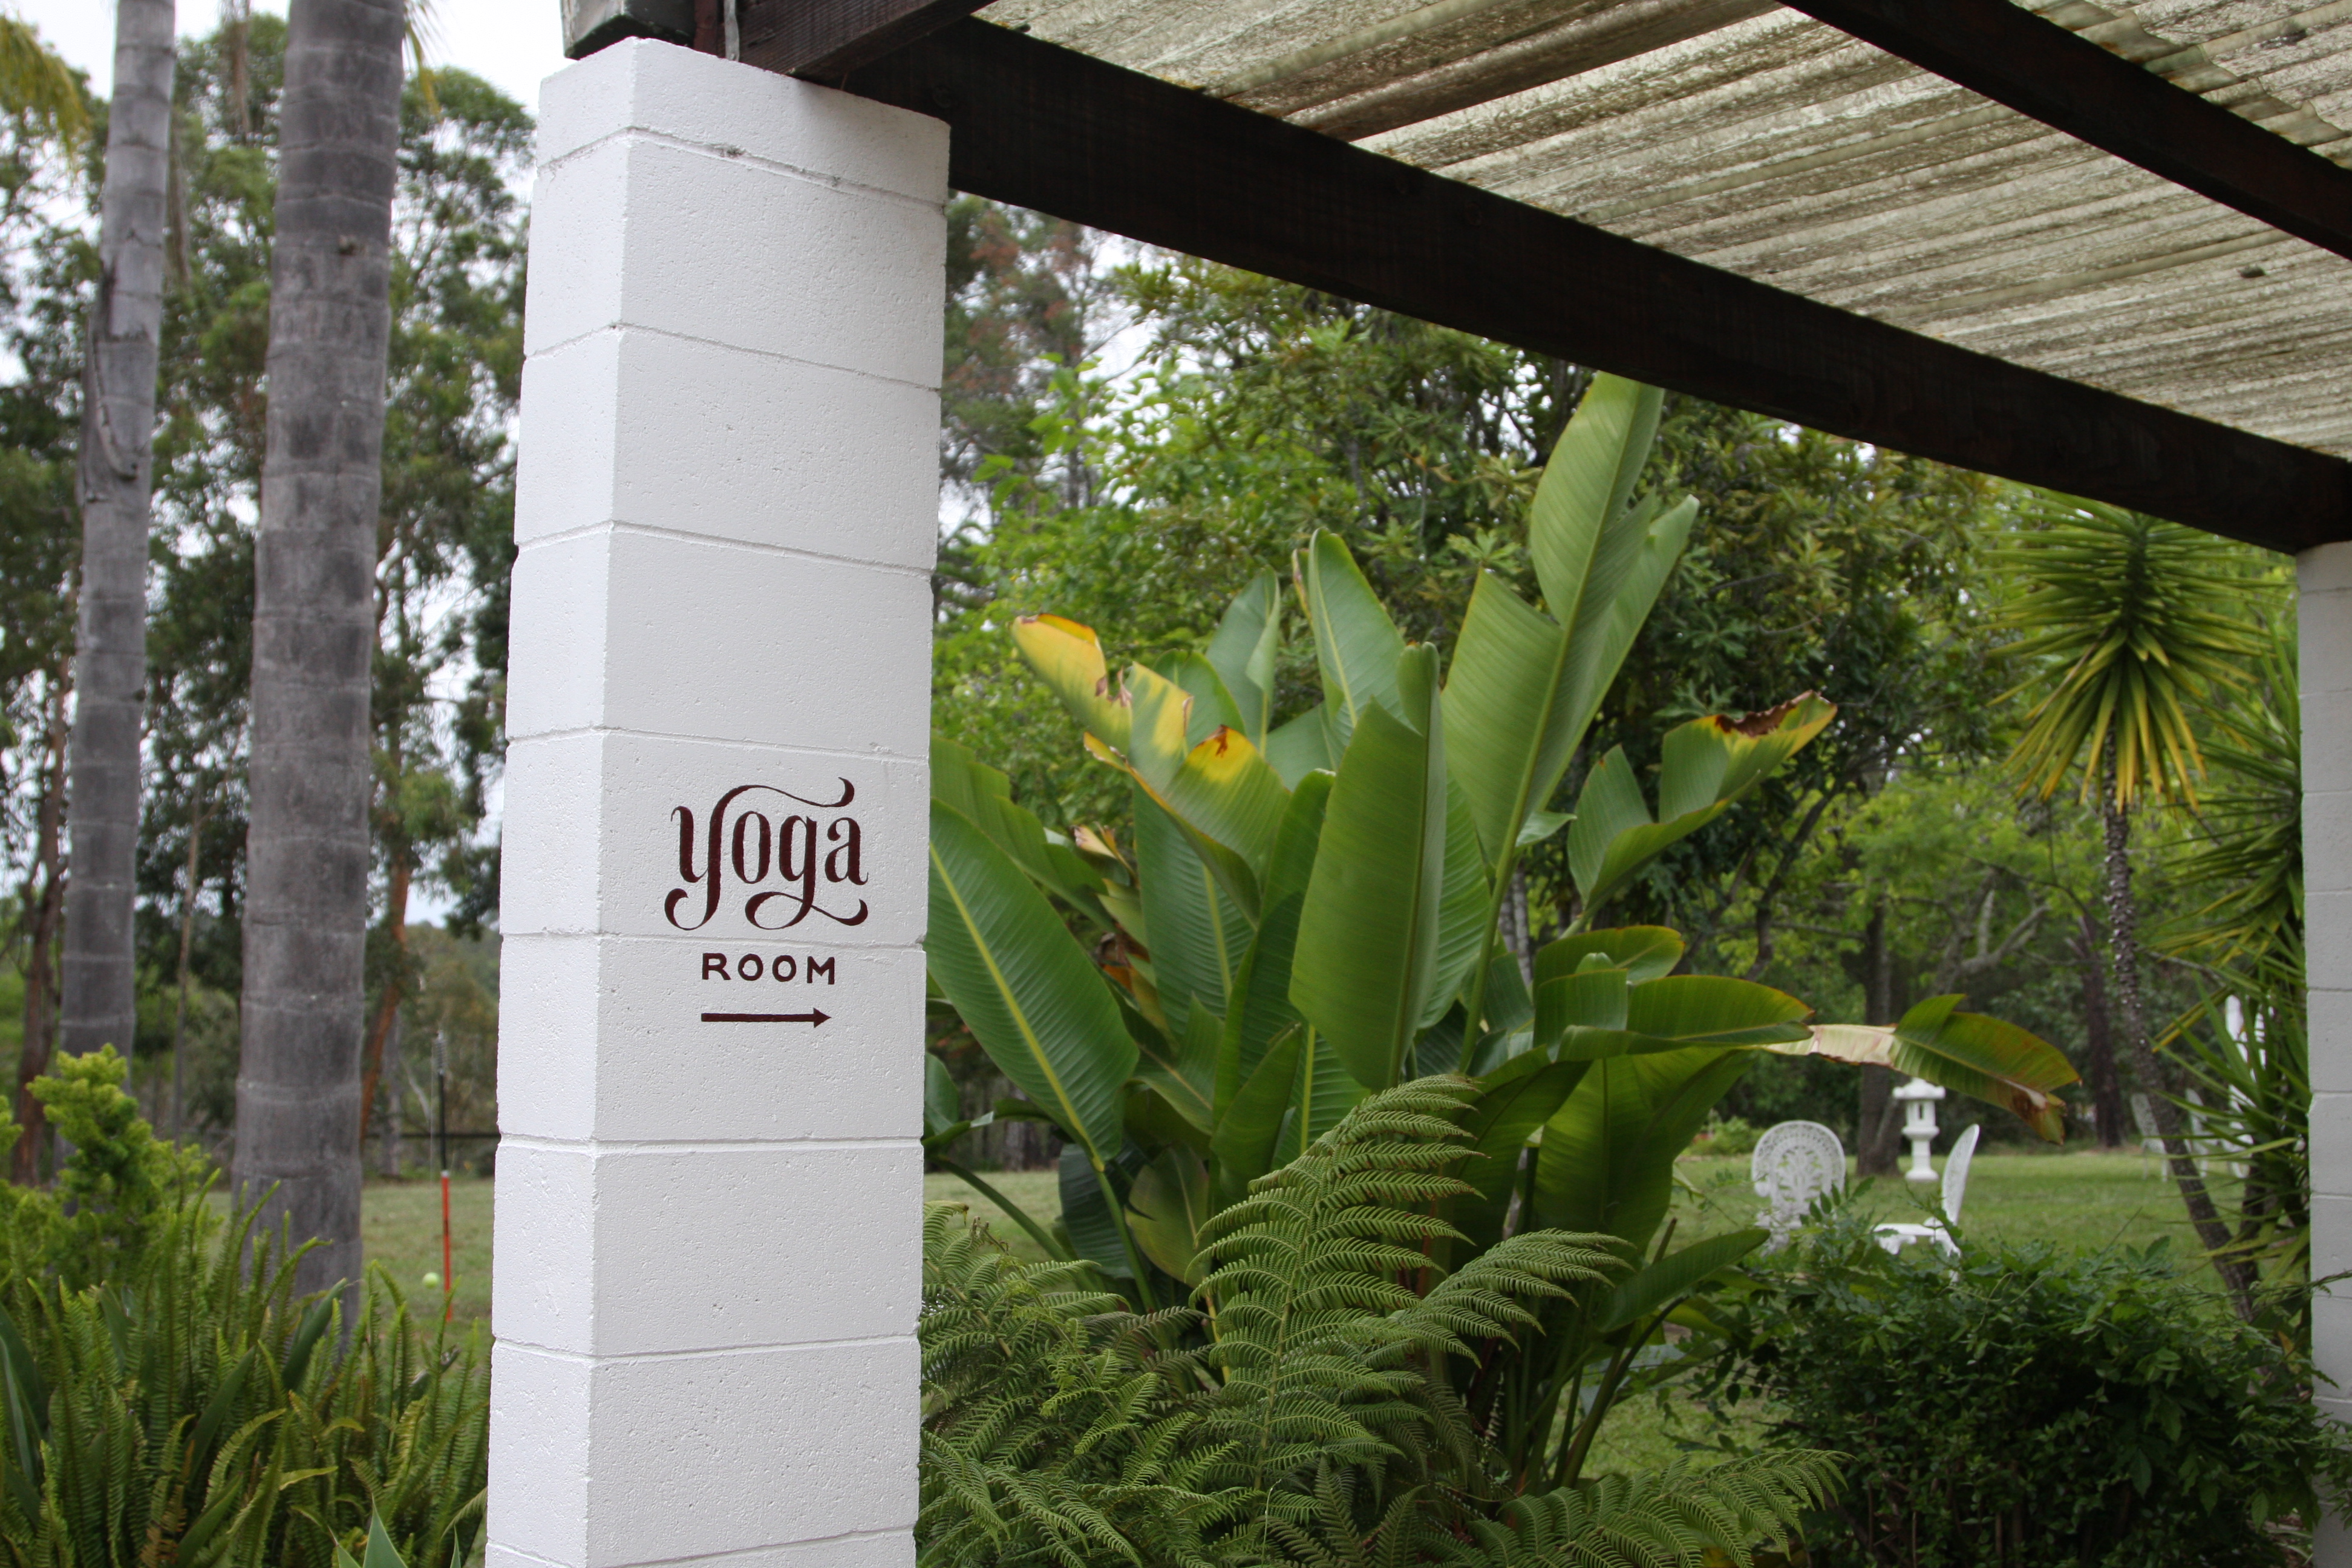 Sign Pointing To the Yoga Room at Swami's Yoga Retreat